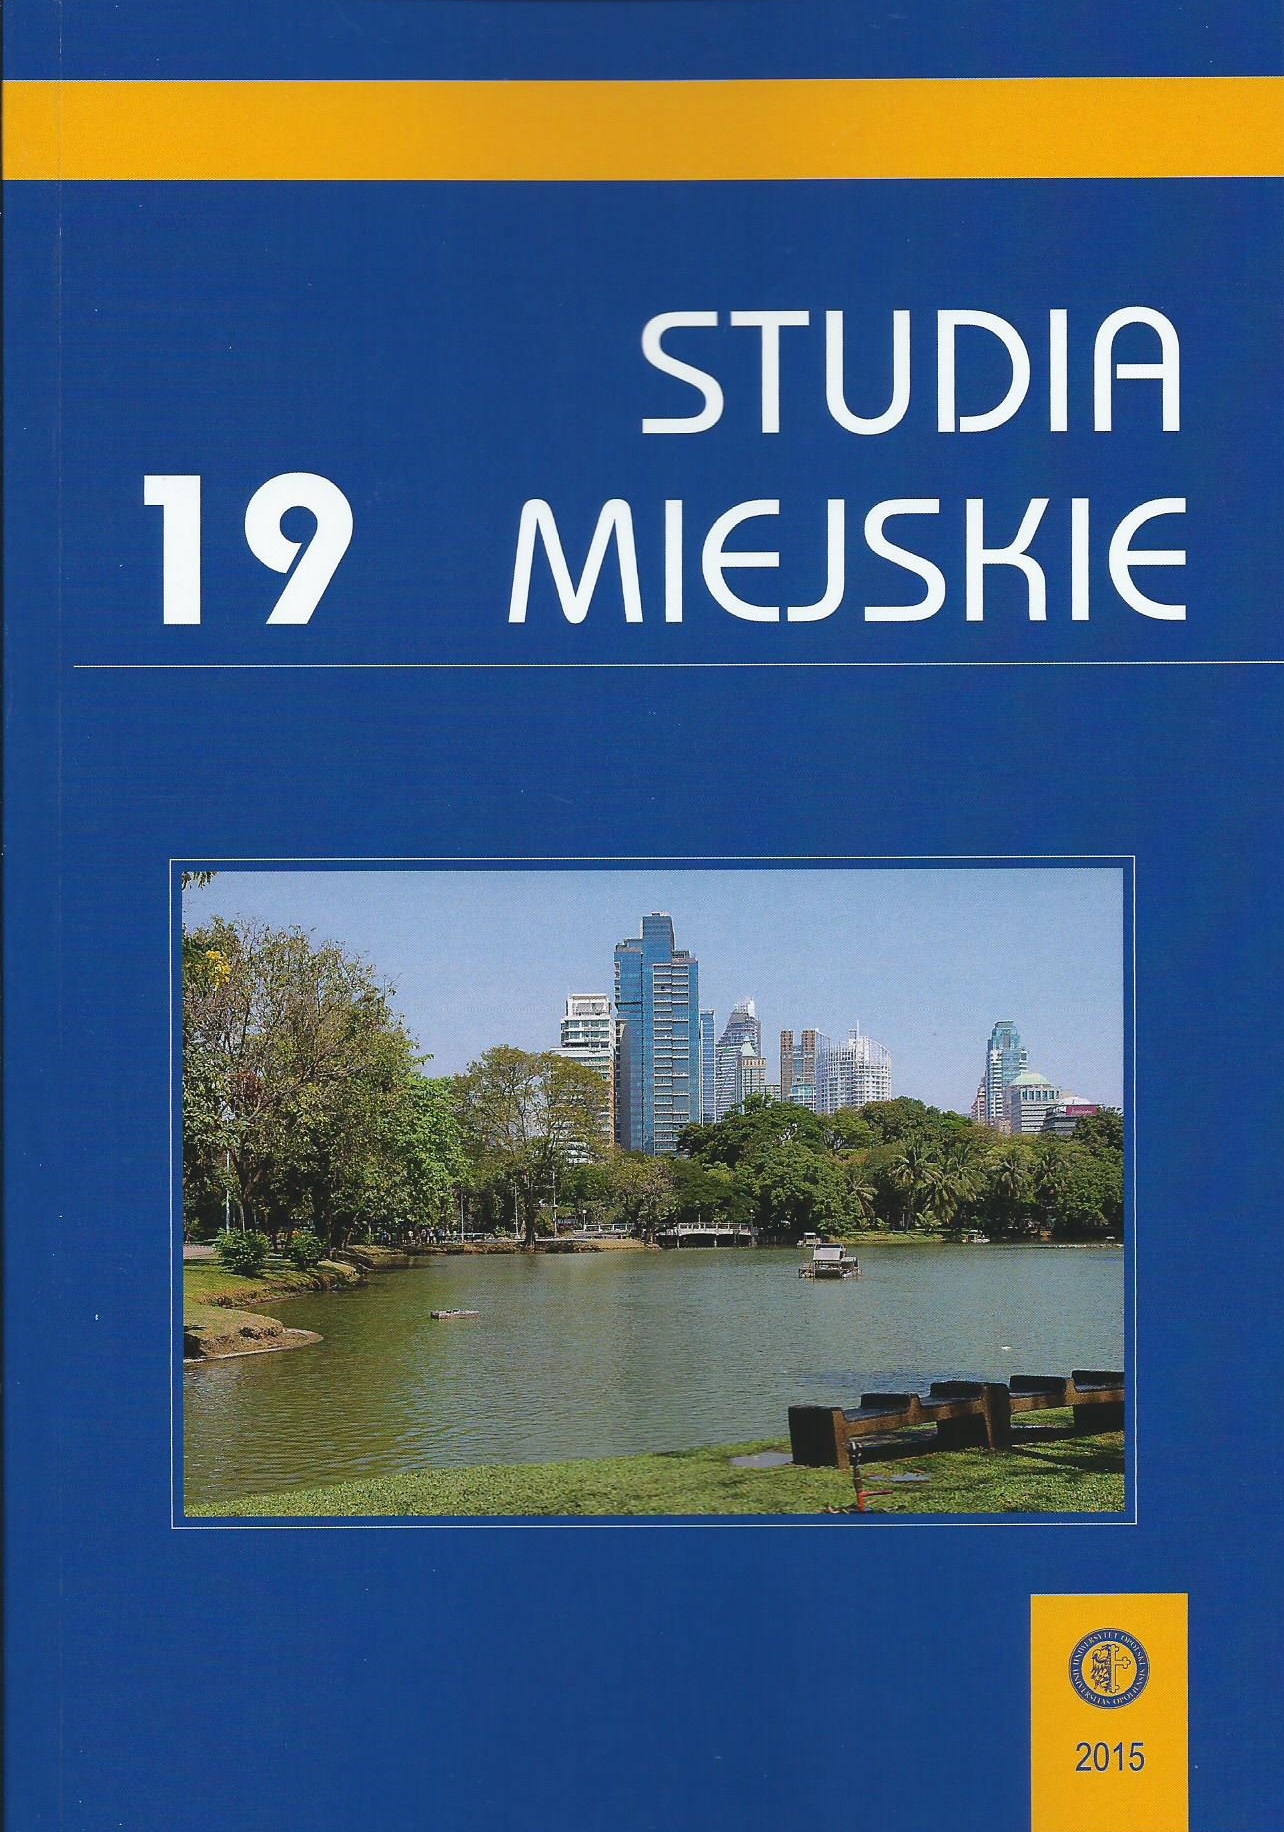 The perhorming an academic function of non-metroplitan cities in Poland in local development strategies Cover Image